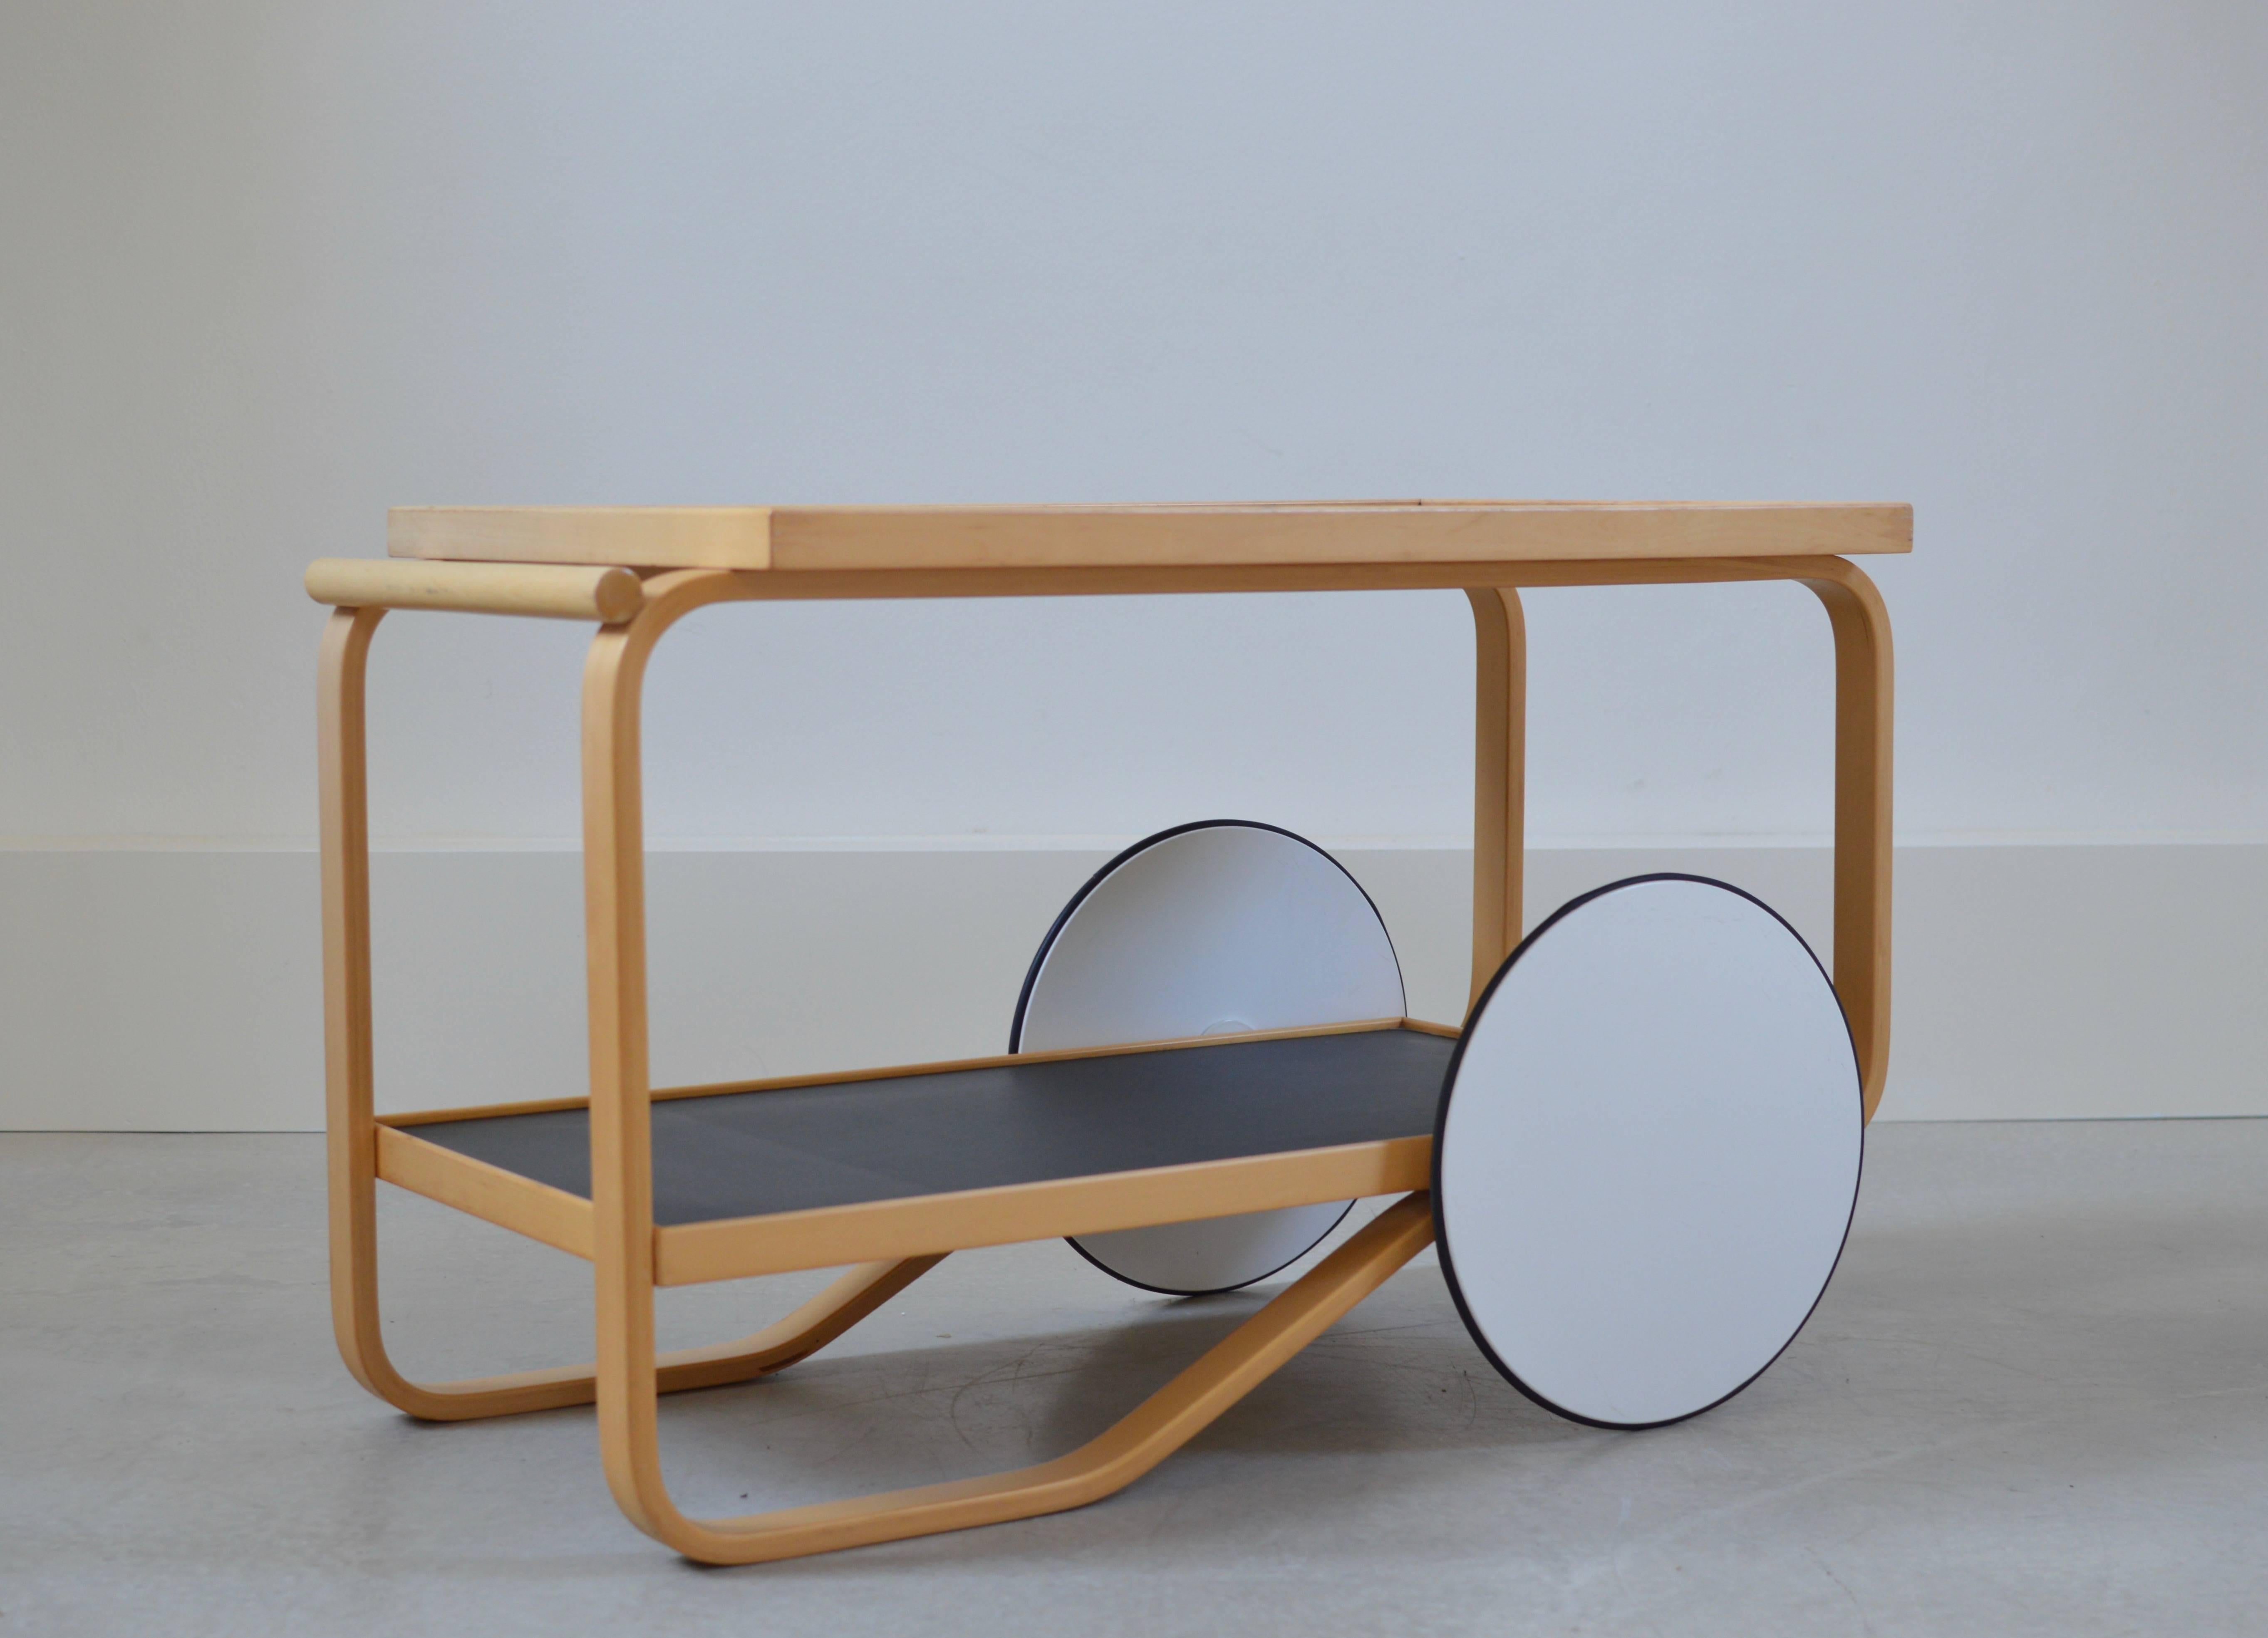 Originally designed in 1936 by Finnish designer Alvar Aalto and introduced in 1937 at the Paris World’s Fair.
The Tea Trolley utilizes a process invented by Aalto for bending thick layers of birch into gracefully curved loops to create strong,